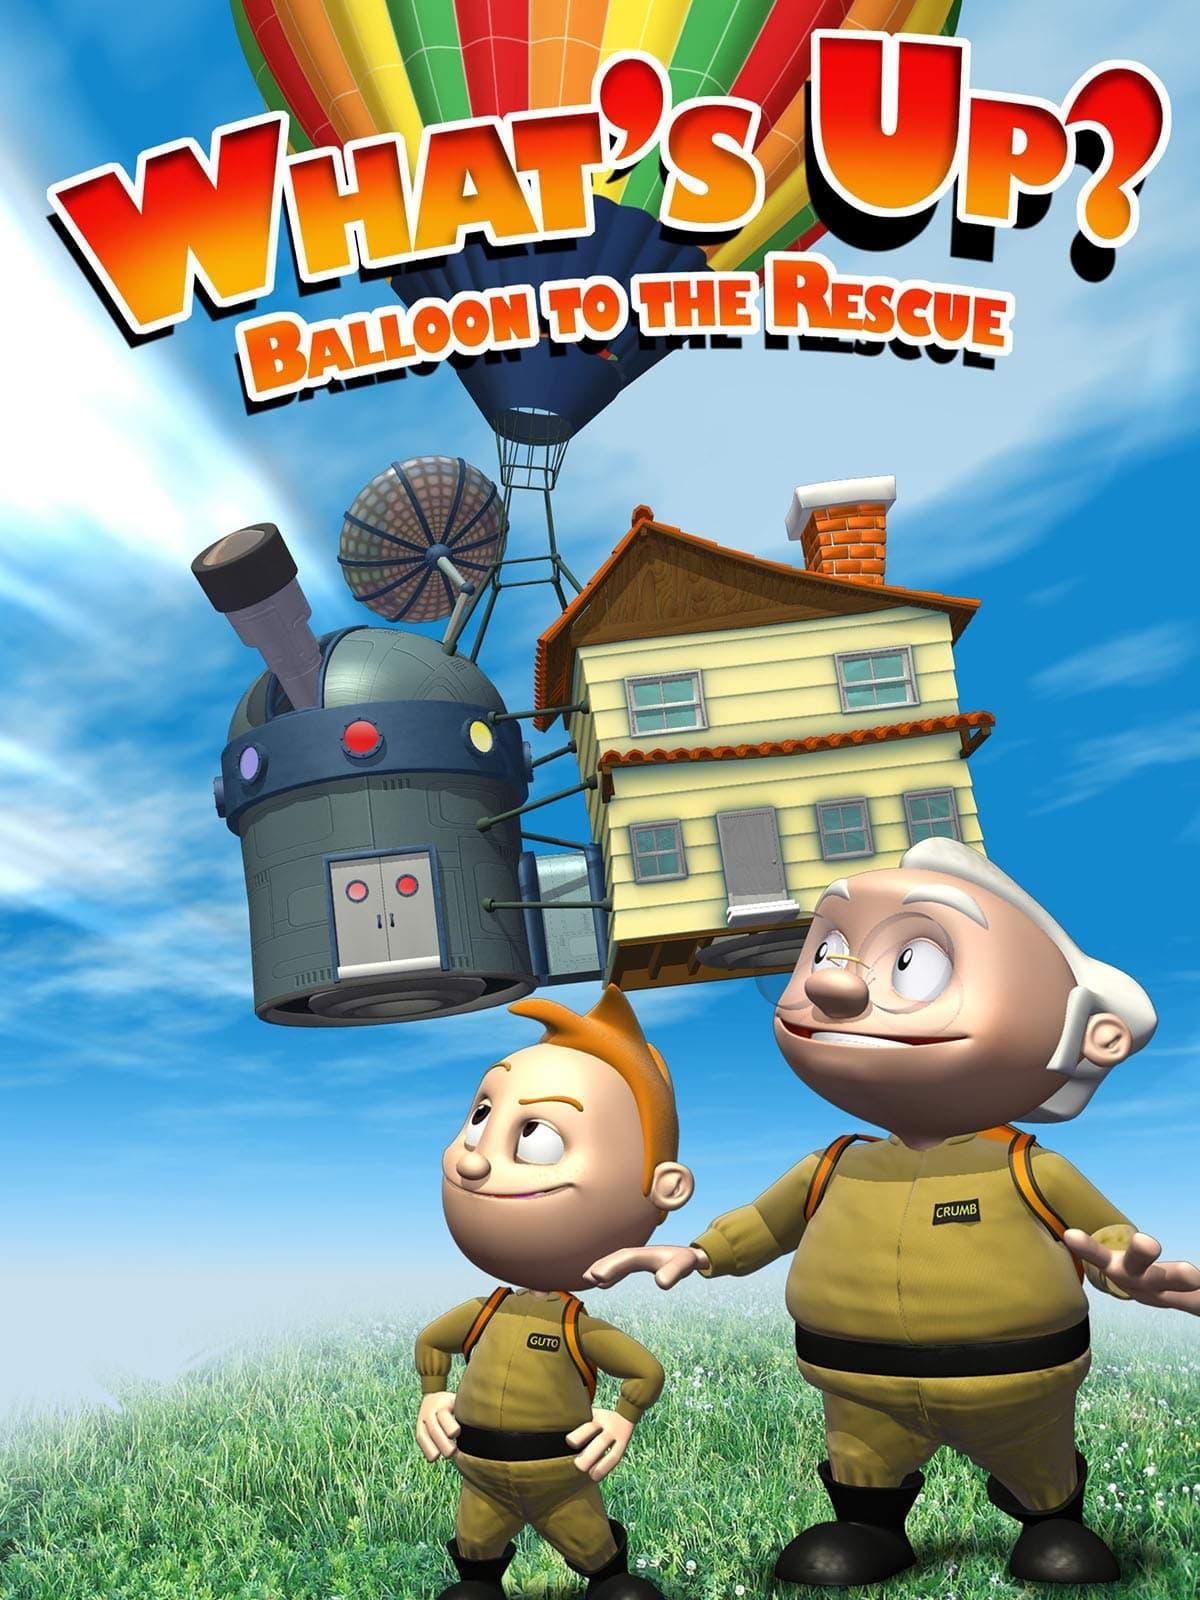 What's Up: Balloon to the Rescue! poster